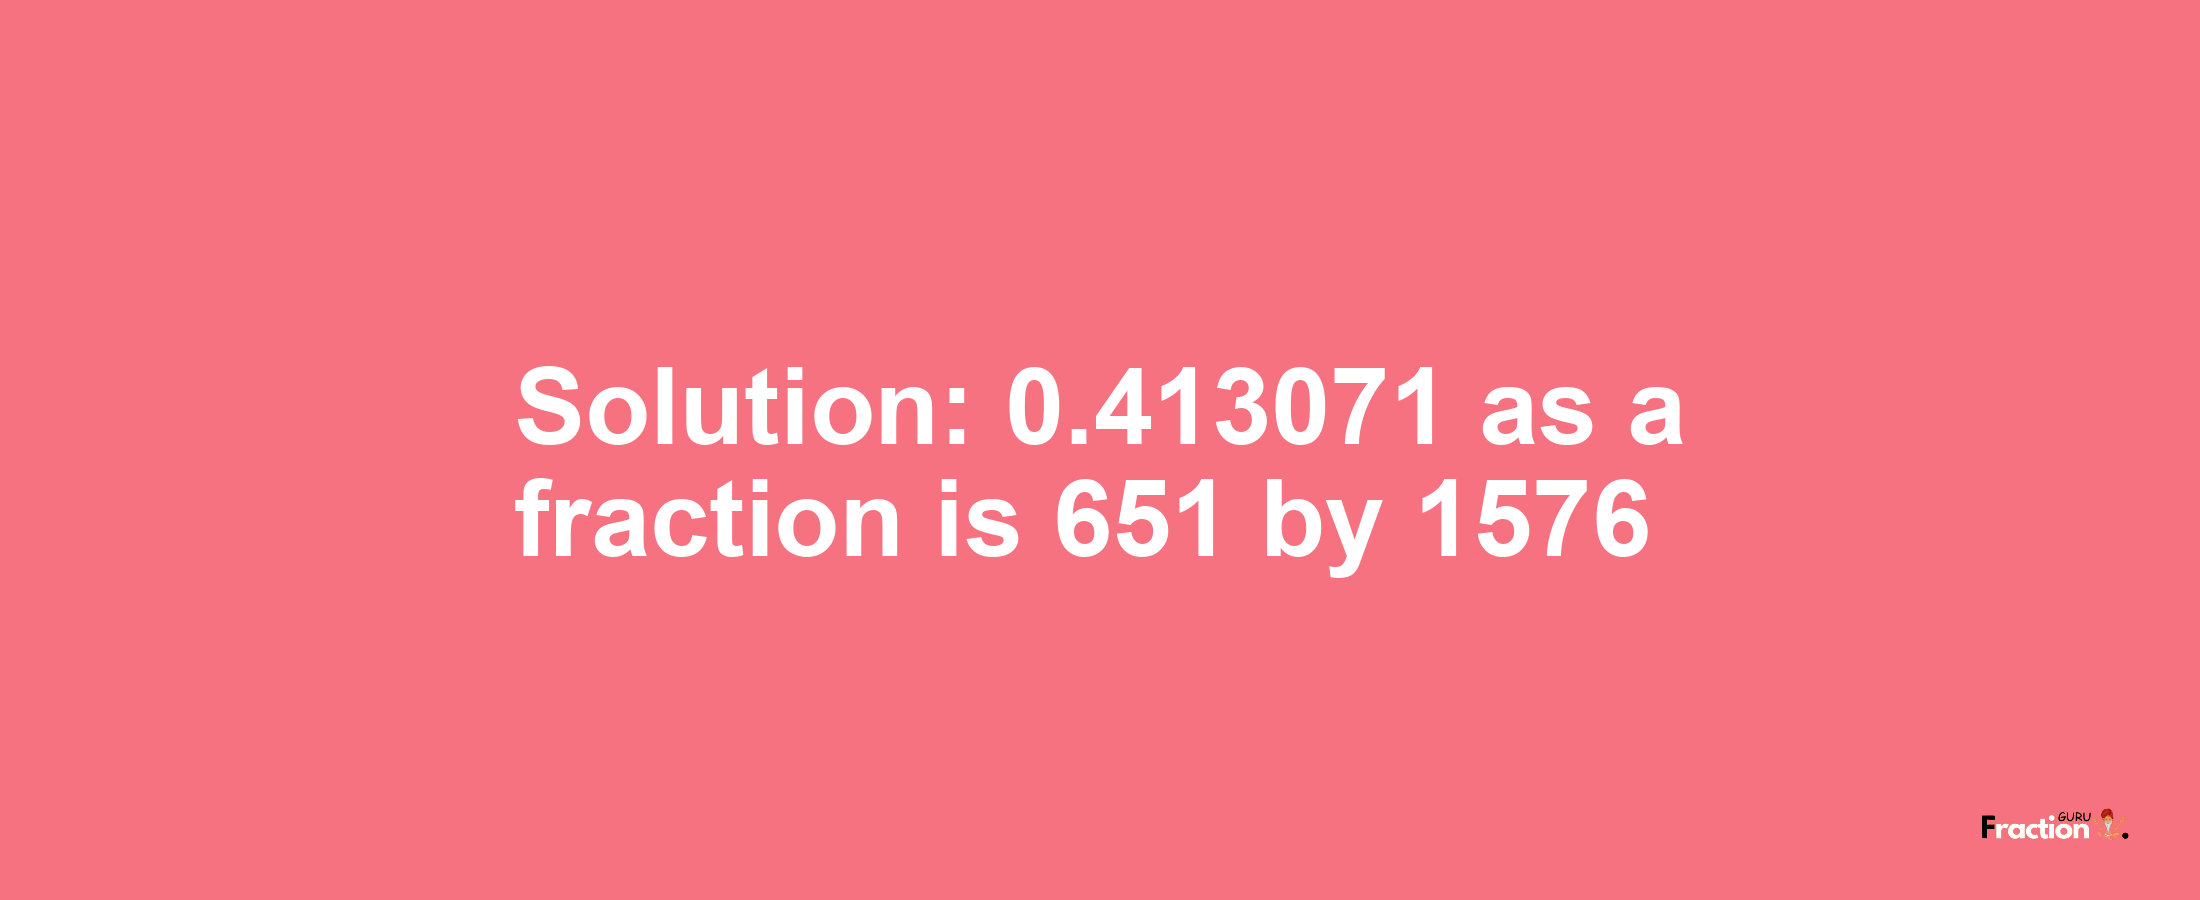 Solution:0.413071 as a fraction is 651/1576